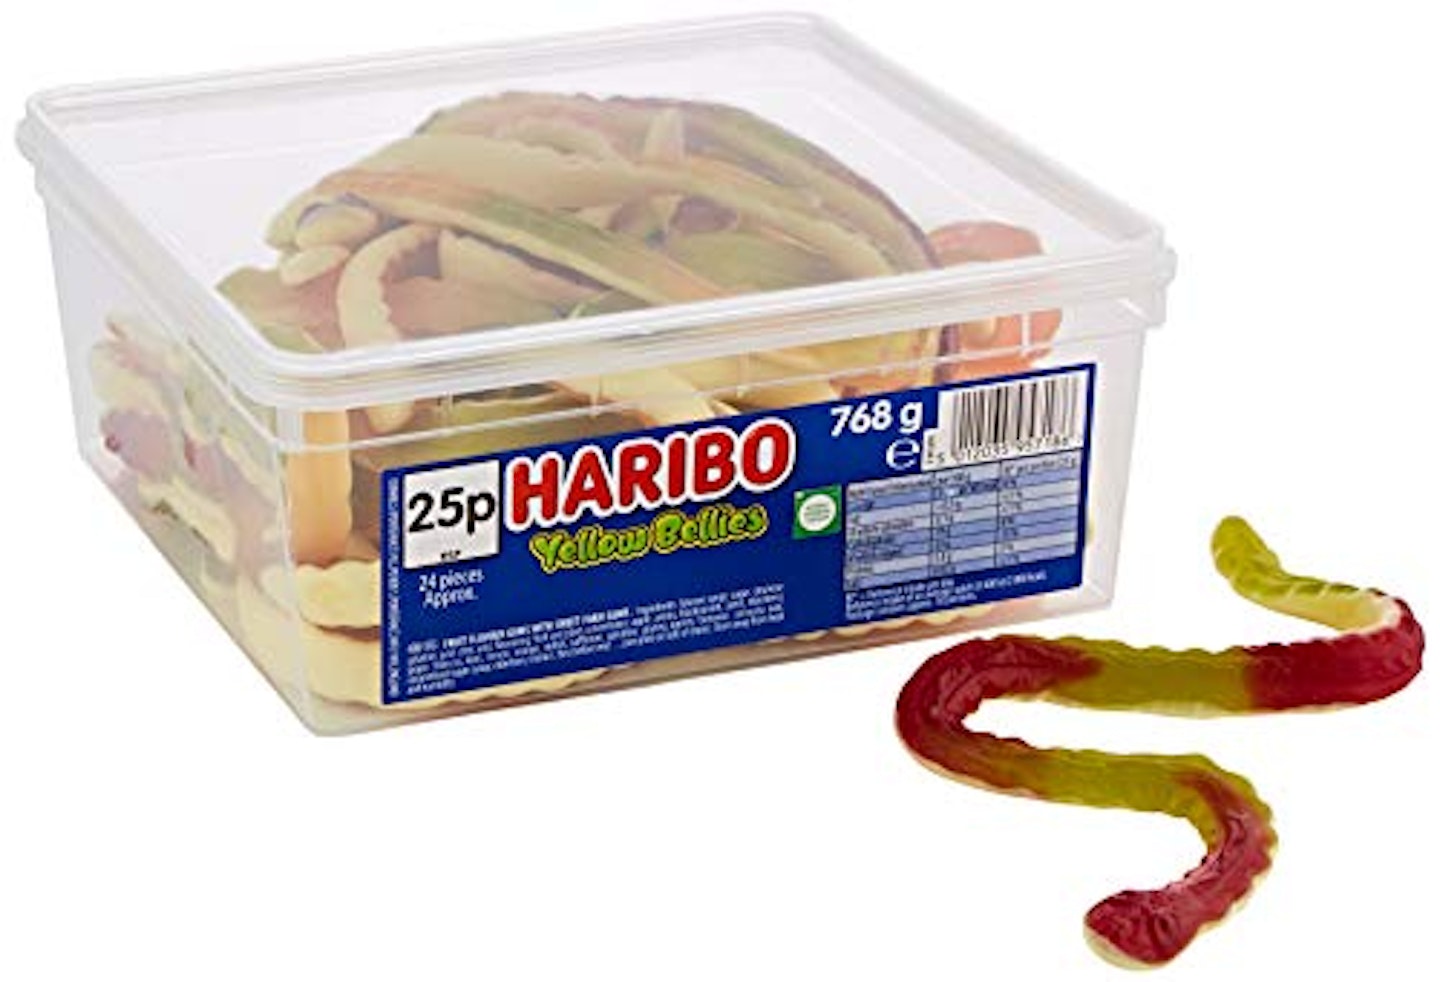 Haribo Giant Snakes Yellow Bellies sweets 768g tub